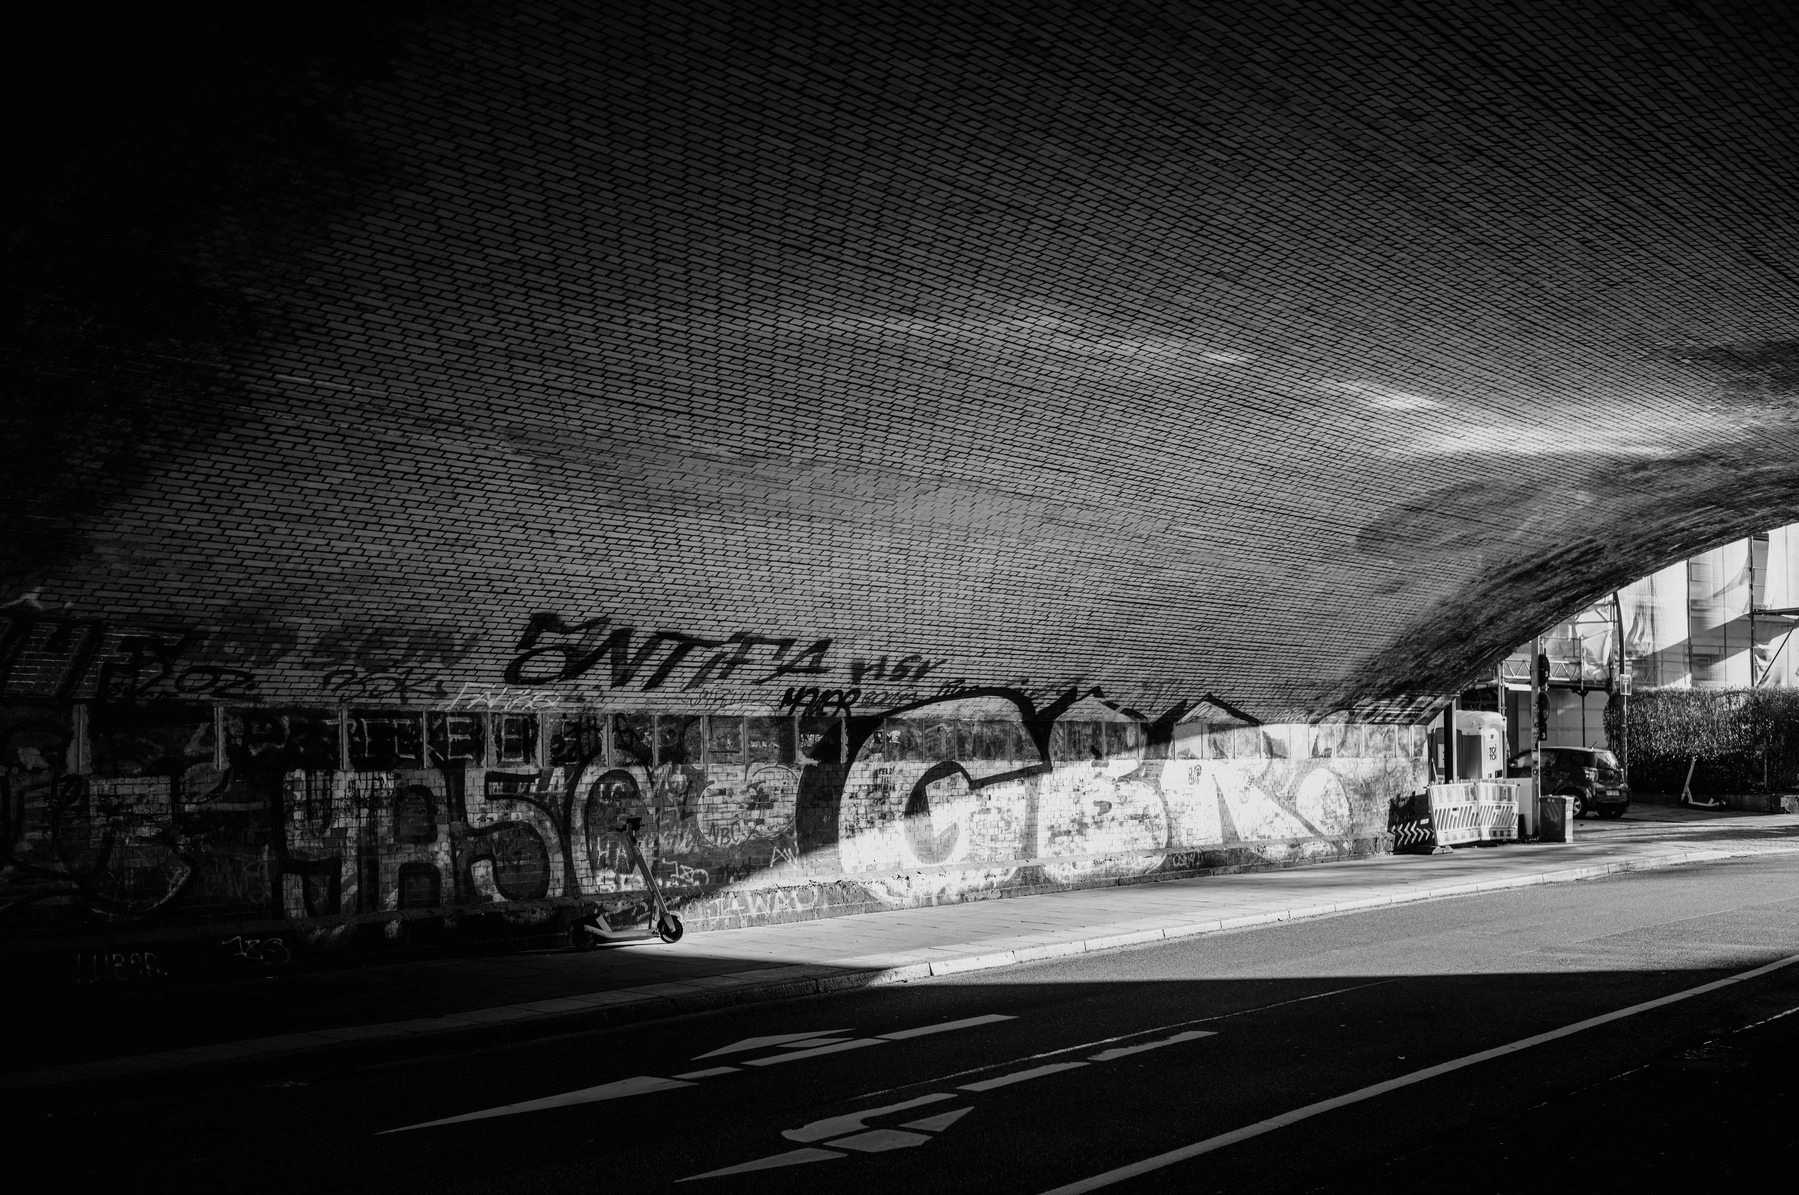 Under the bridge, with some graffities on the wall,  lack and white